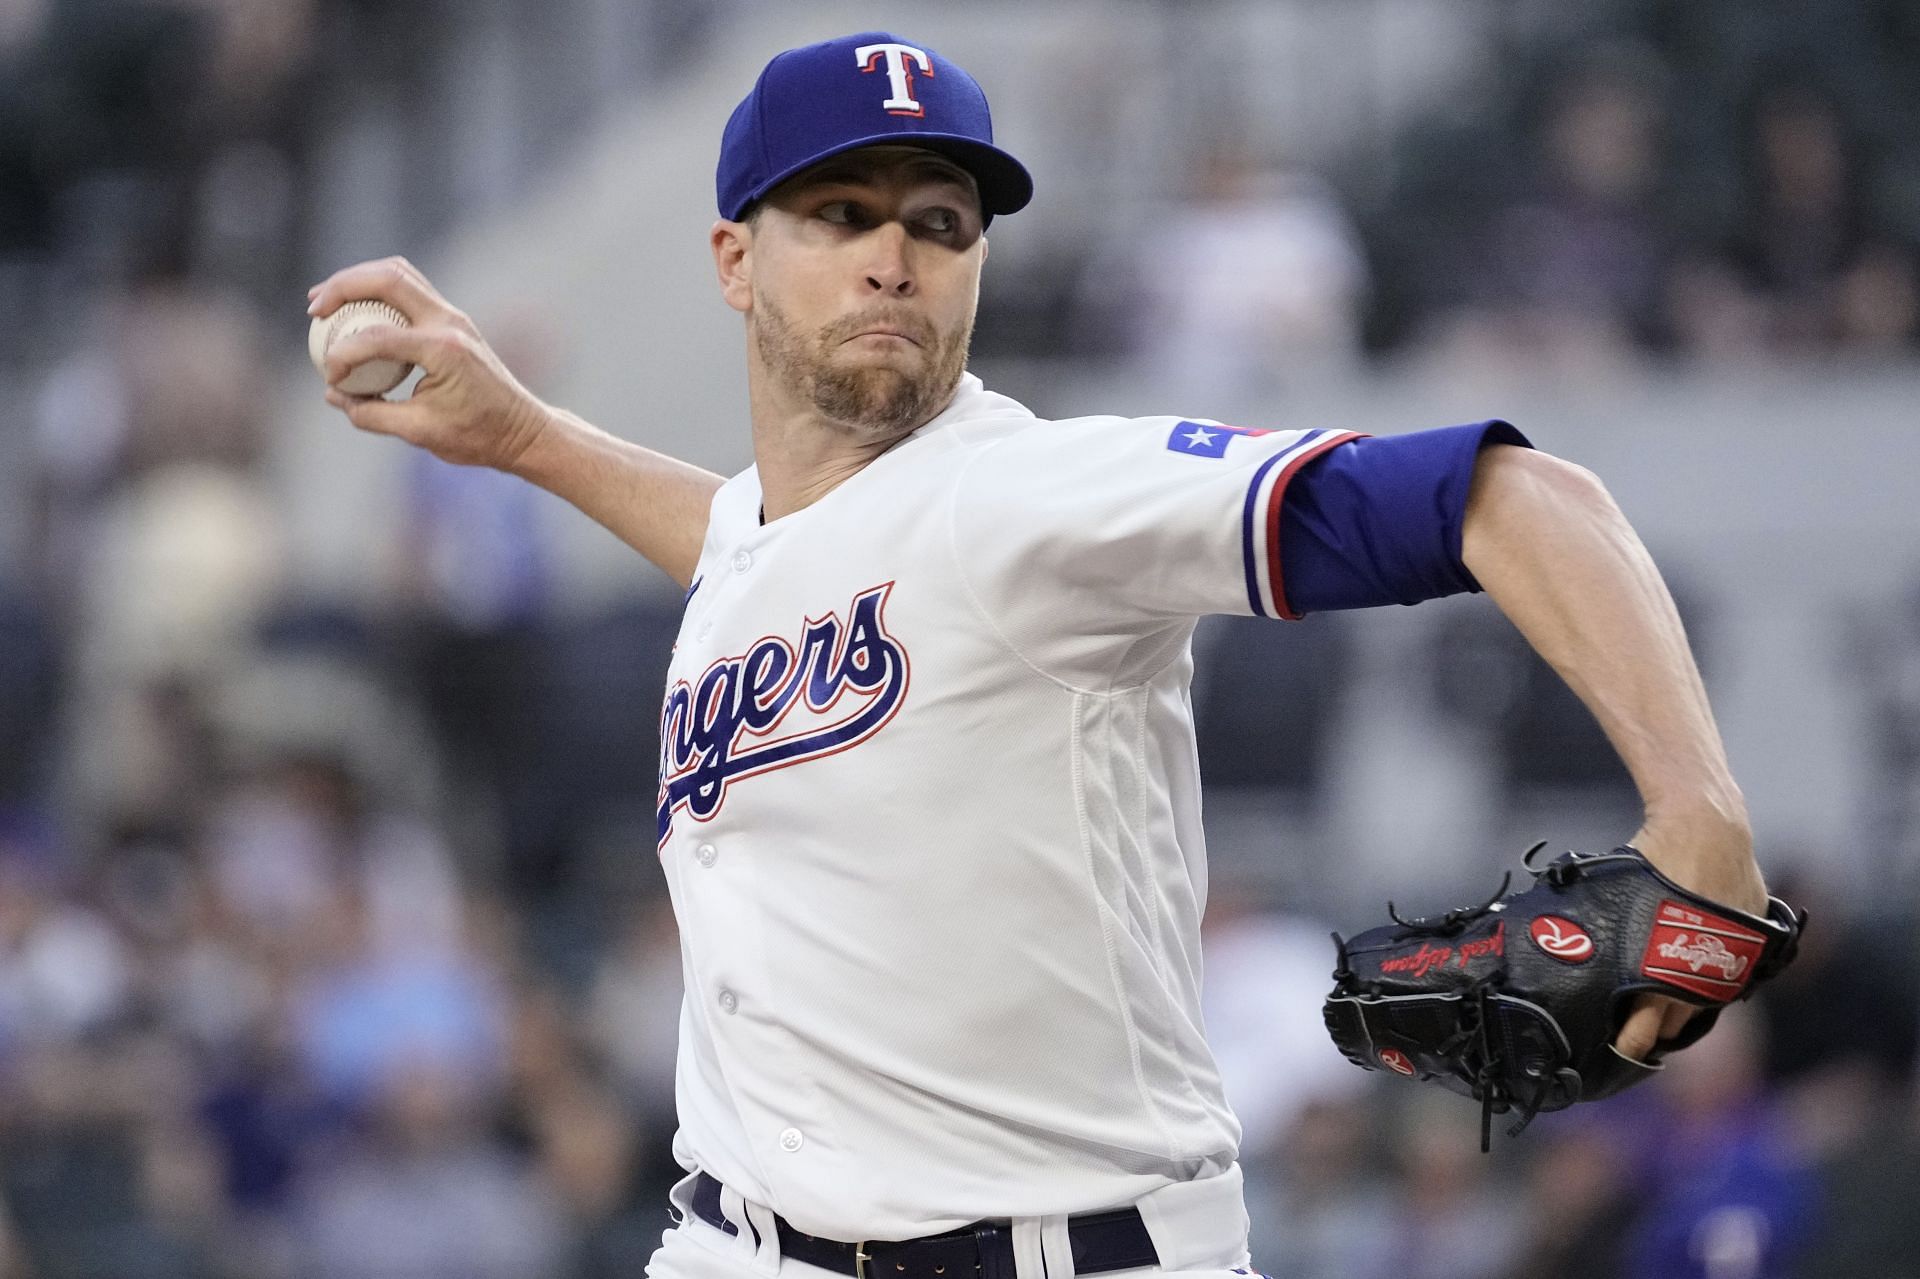 Rangers ace Jacob deGrom leaves start with sore right wrist –